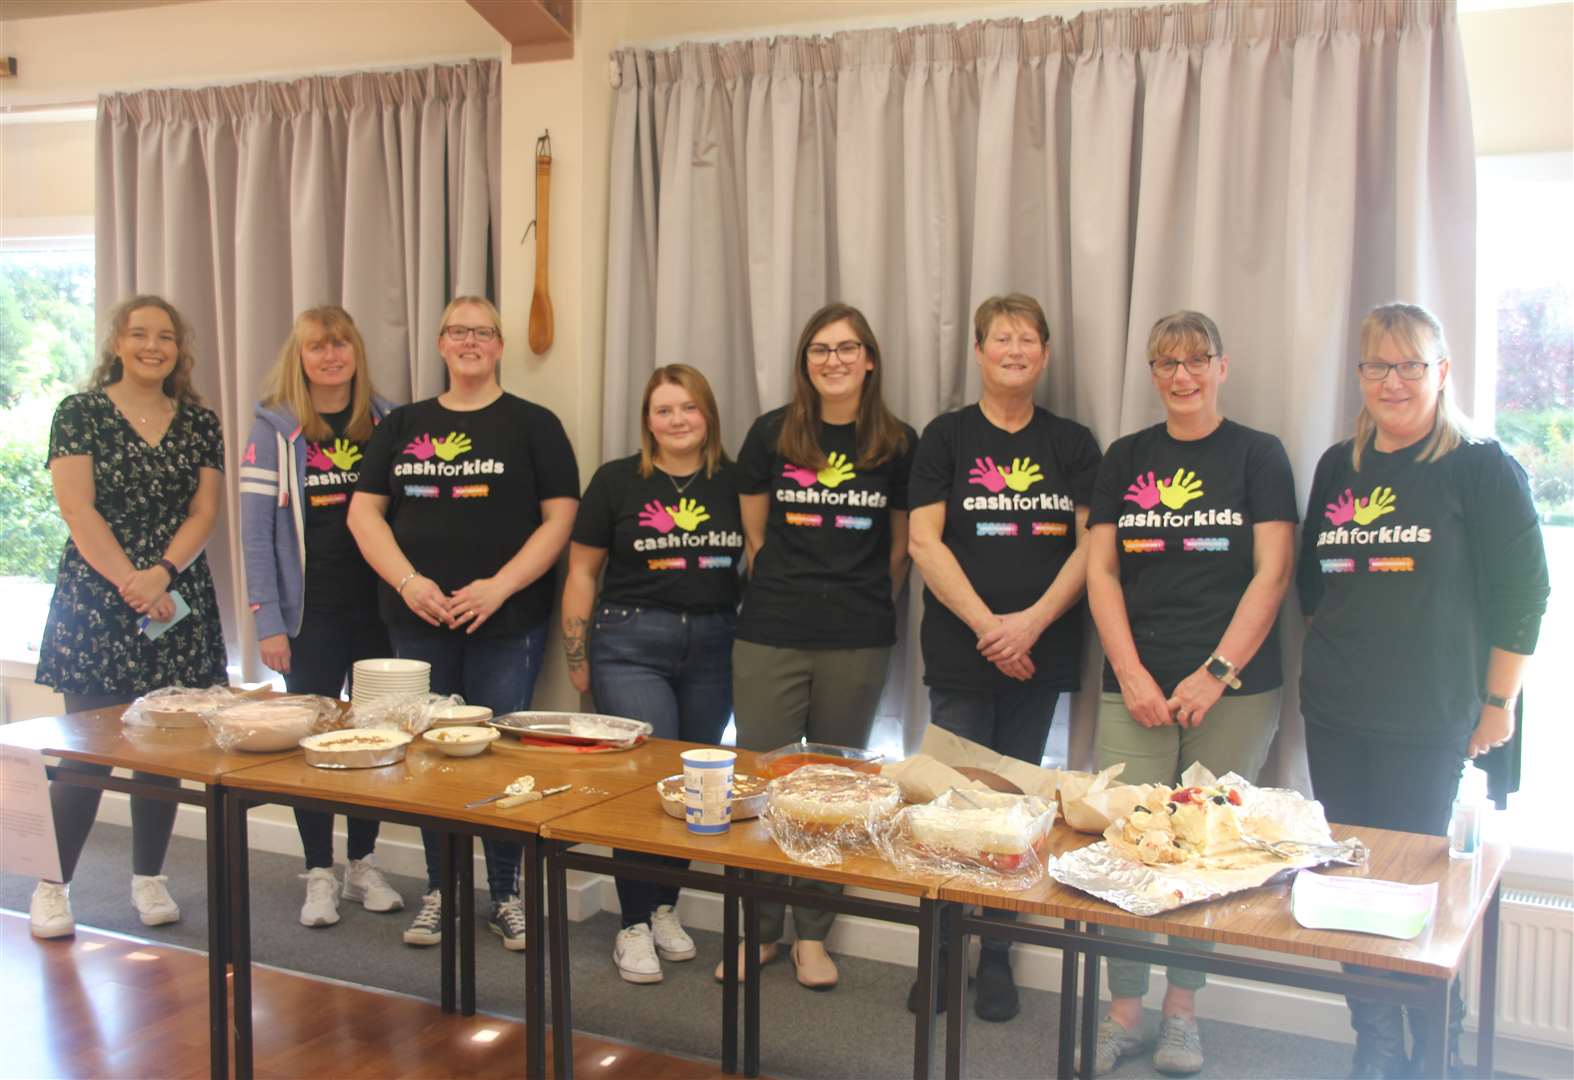 Soup and sweet organised by Tesco Turriff staff raises £530 for Cash For Kids